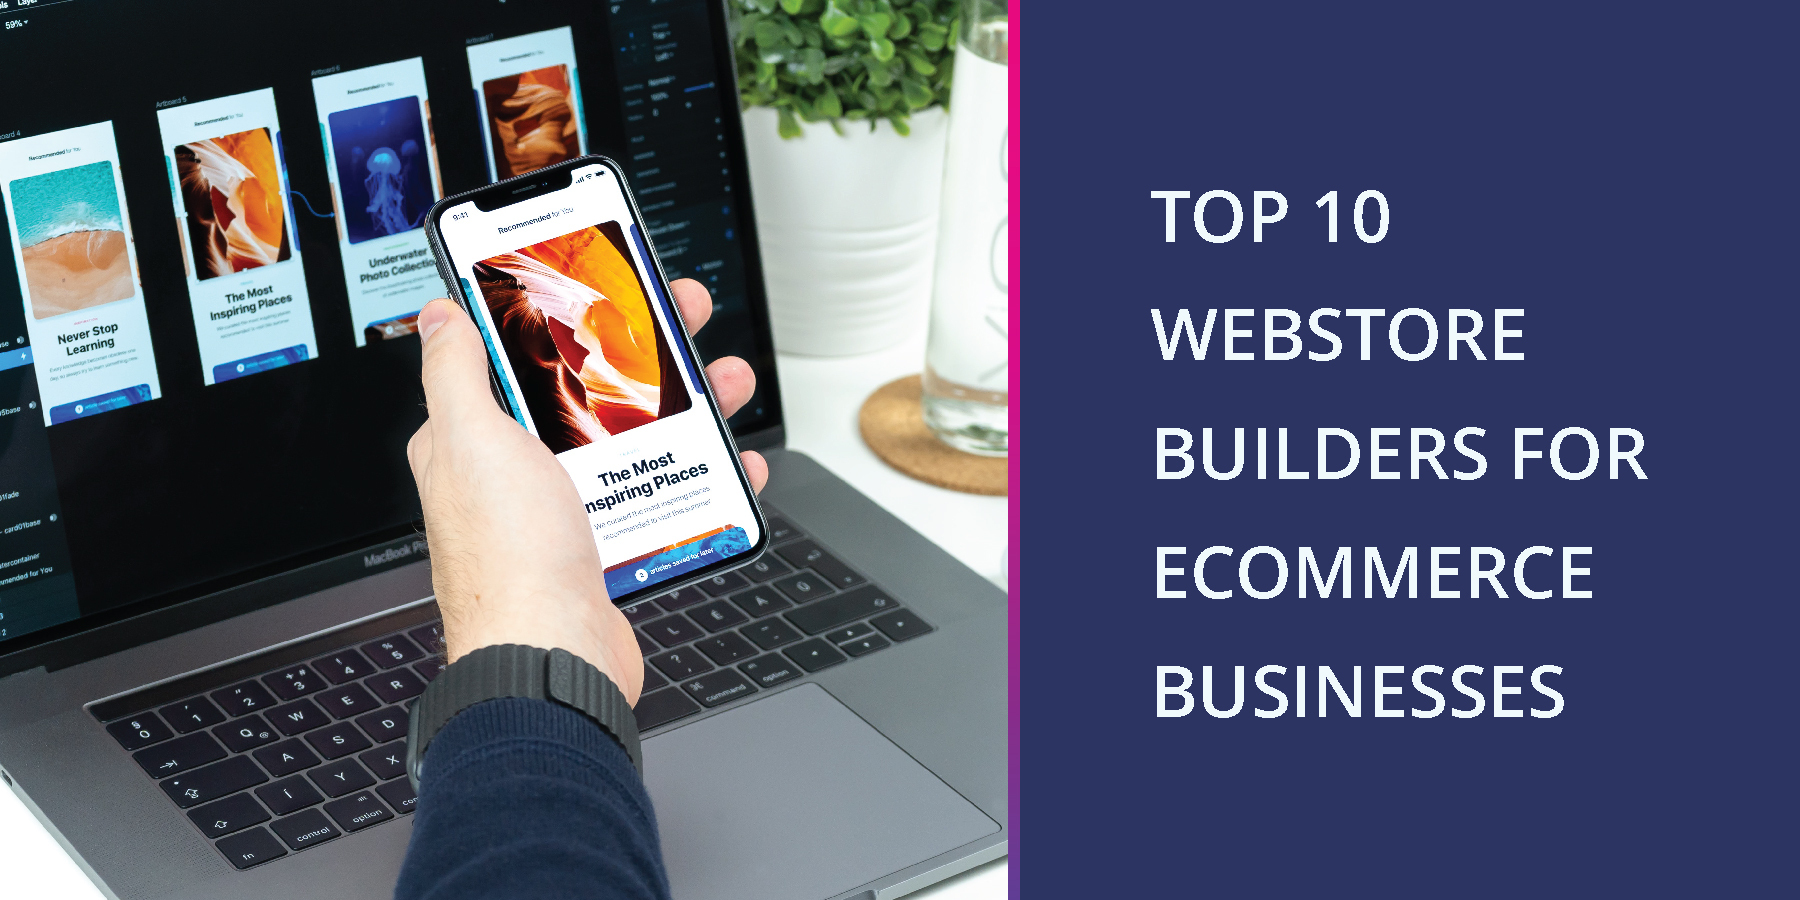 Top 10 Webstore Builders for E-commerce Businesses